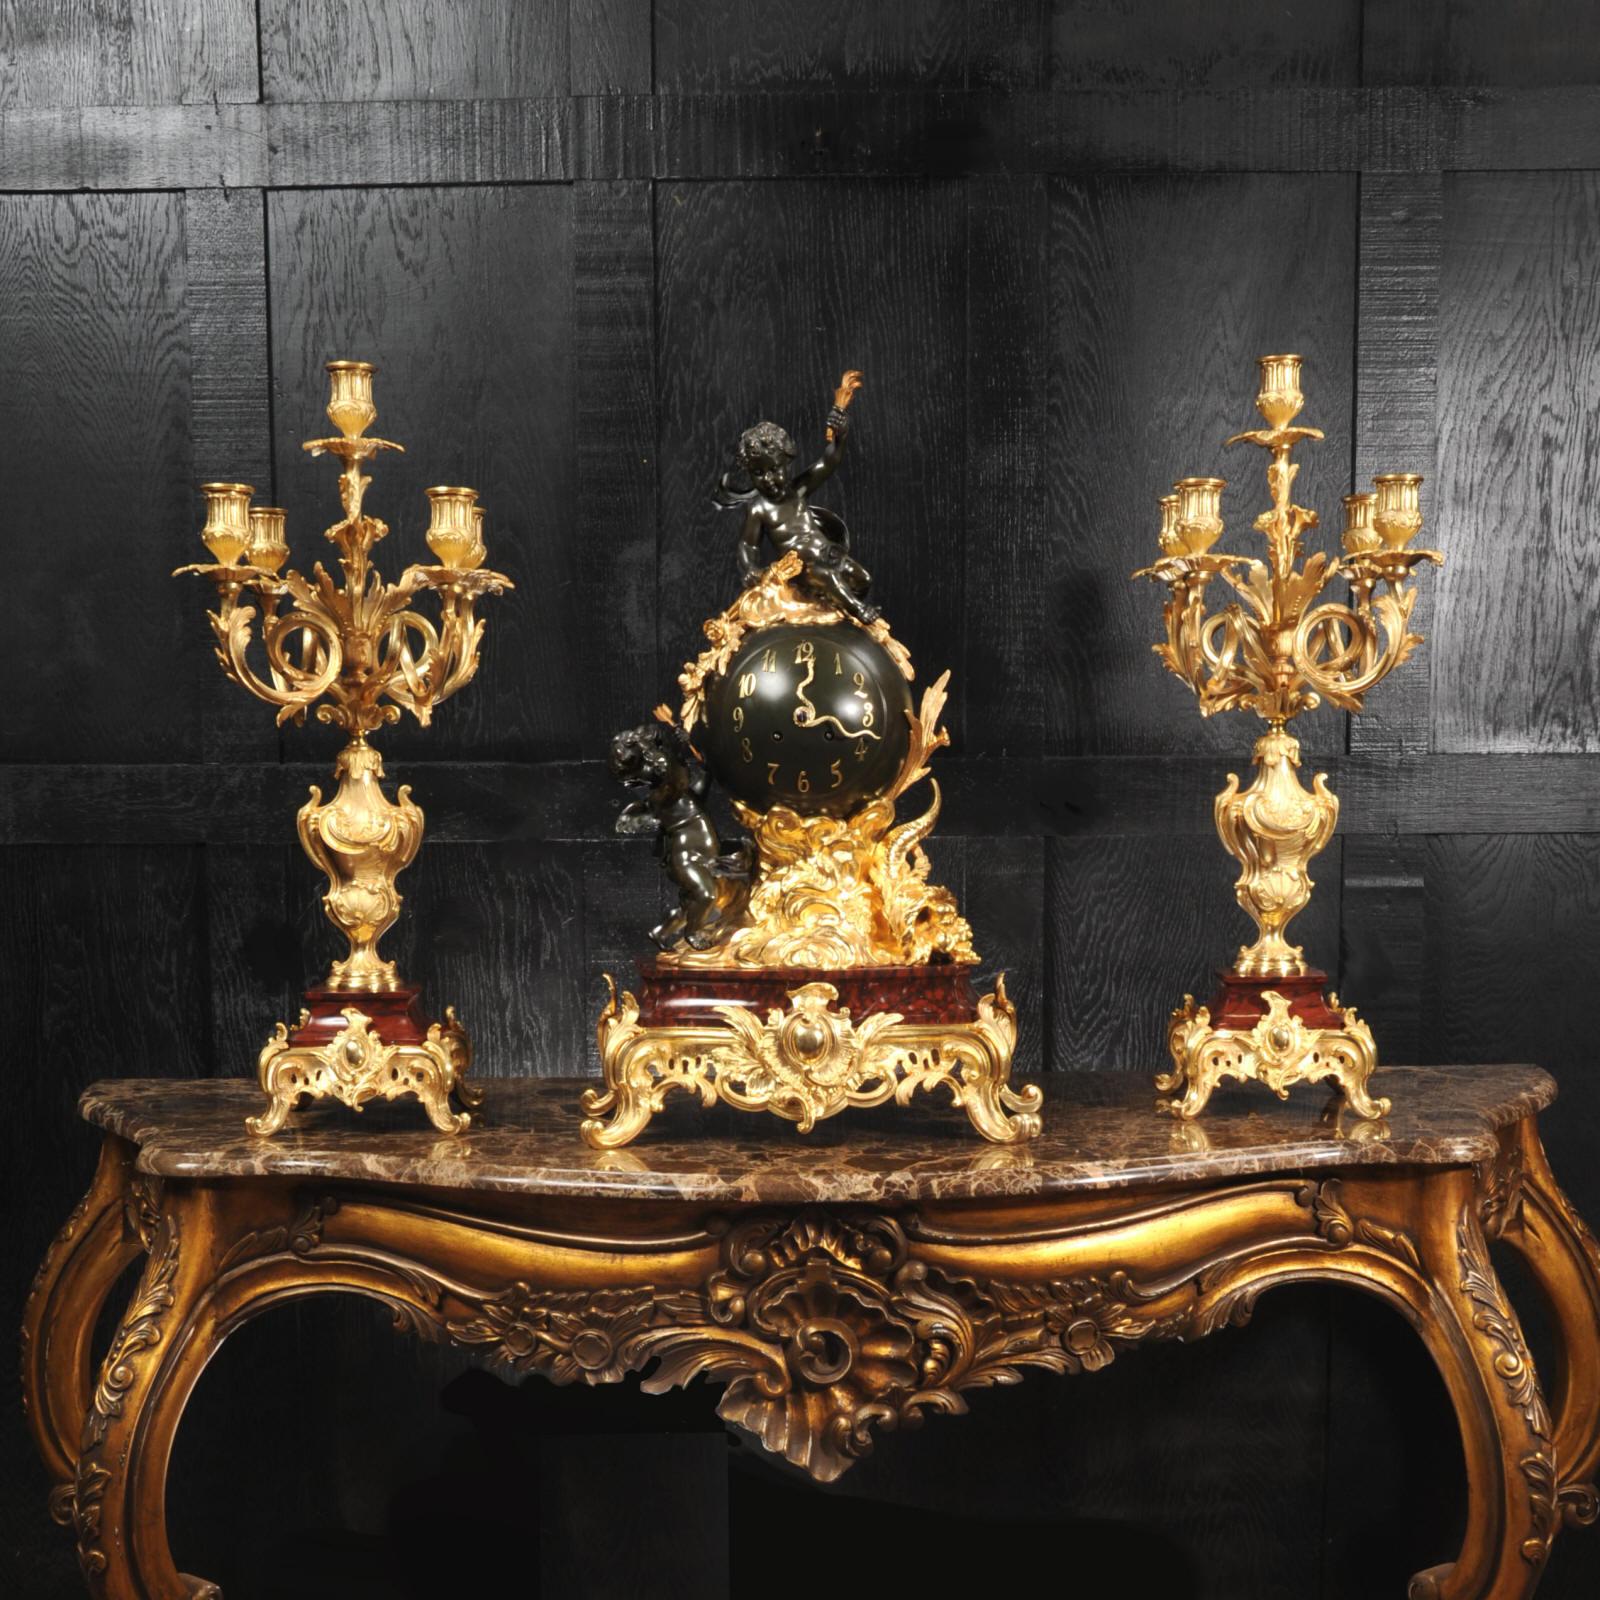 An exceptional antique French Louis XV style clock set, circa 1870. Beautifully made in ormolu (finely gilded Bronze Dore), patinated bronze and Rouge Griotte Marble. The clock is mounted in a bronze orb floating in the ormolu clouds. Cherubs